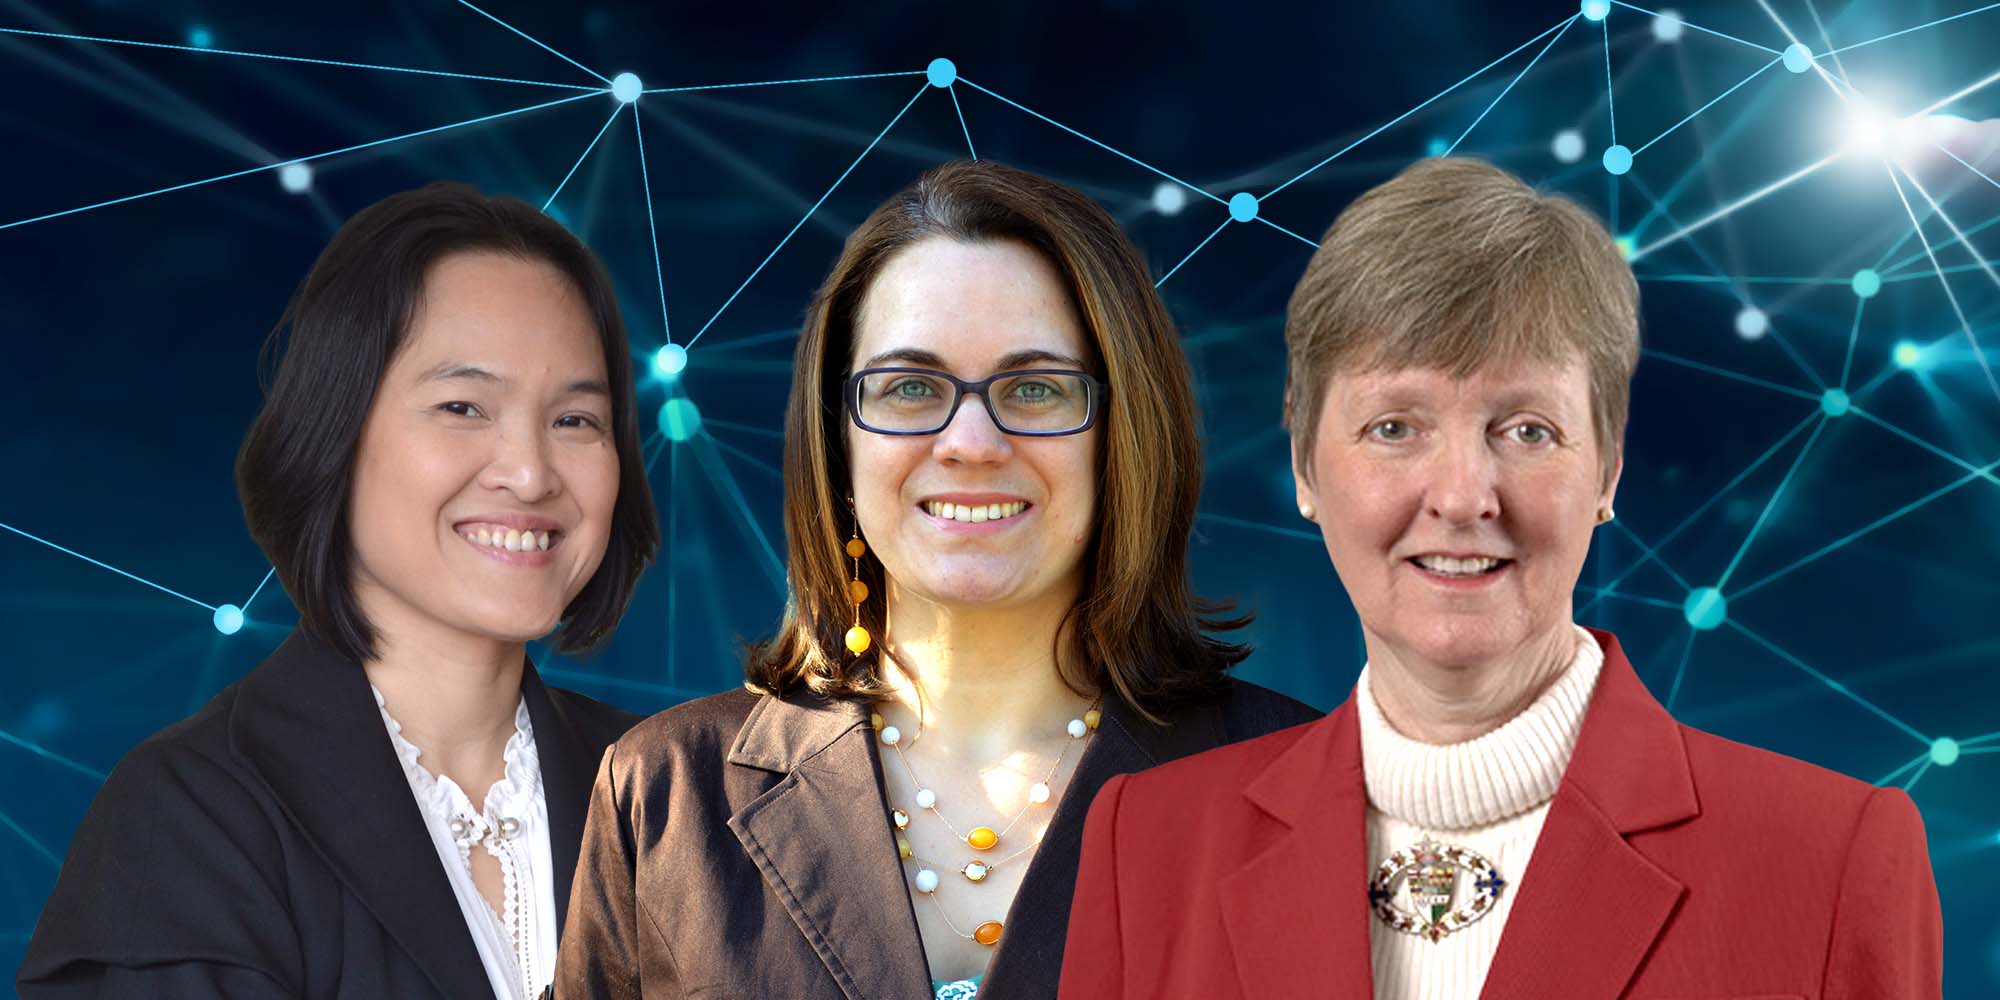 L-R: My Thai, Ph.D., professor in CISE and associate director of the Nelms Institute for the Connected World ; Lisa Anthony, Ph.D., associate professor and director of Intelligent Natural Interaction Technology in CISE; Barbara Evans, Ph.D., J.D., holds a dual appointment as a professor in both the Levin College of Law and the Herbert Wertheim College of Engineering